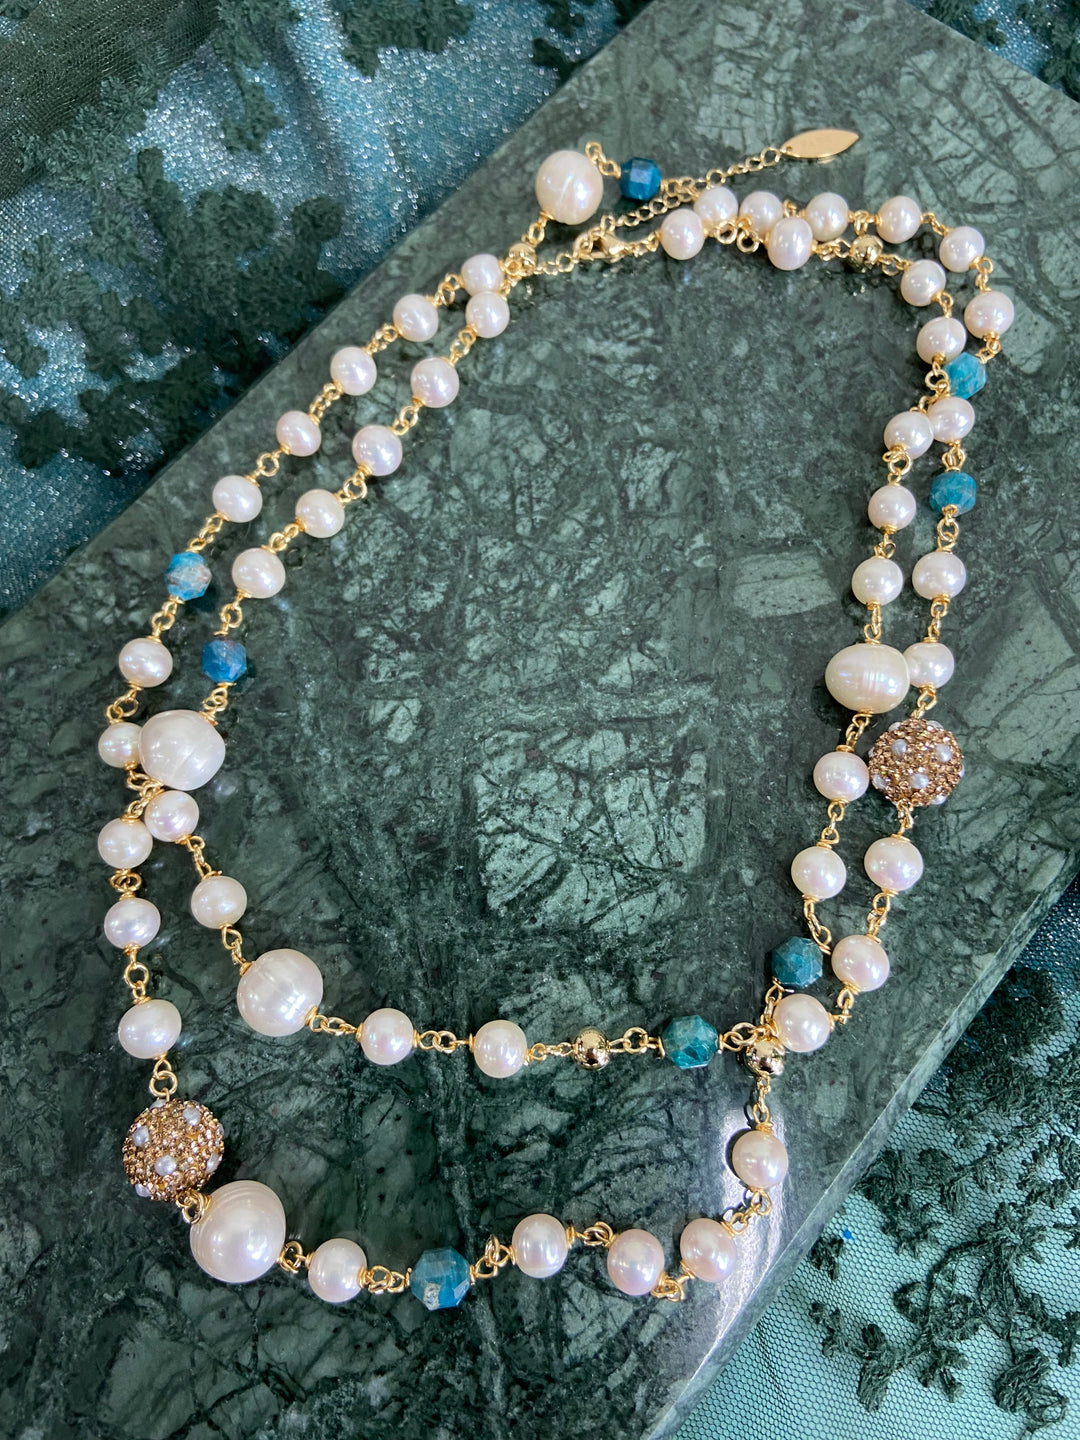 Freshwater Pearls With Blue Apatite Multi-Way Necklace GN007 - FARRA